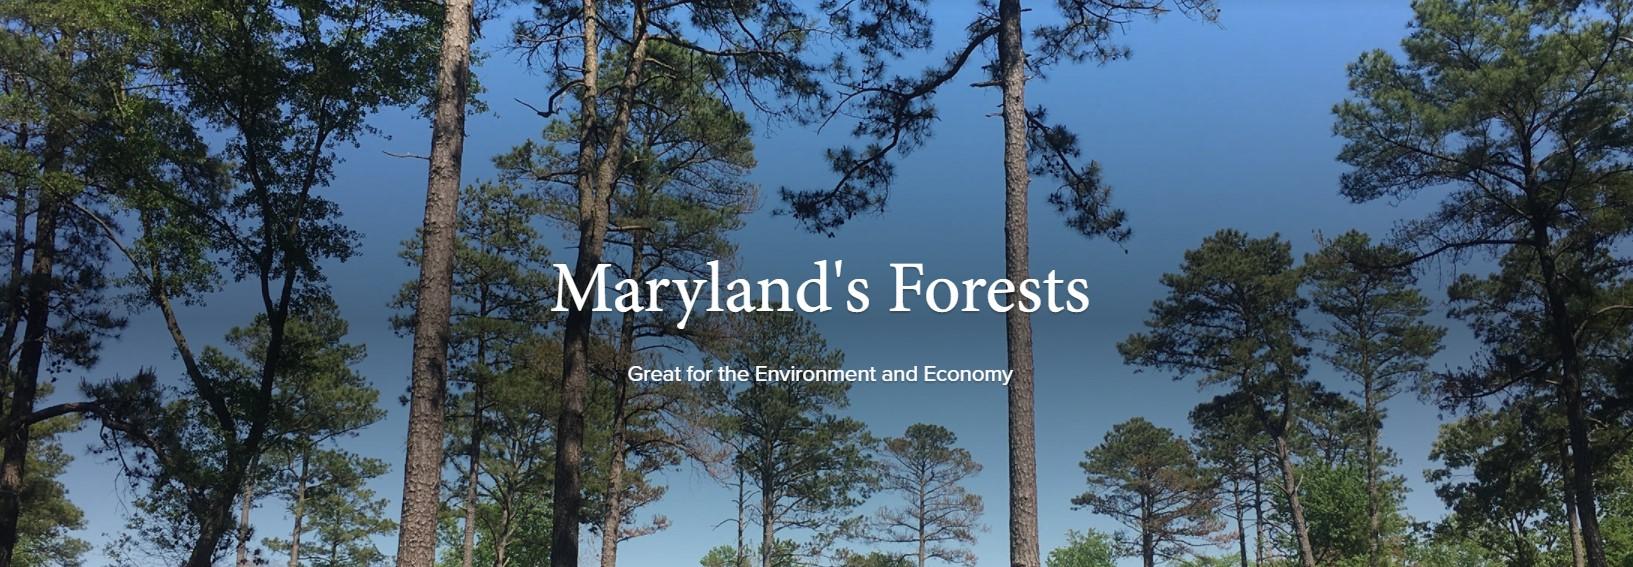 Maryland's Forests